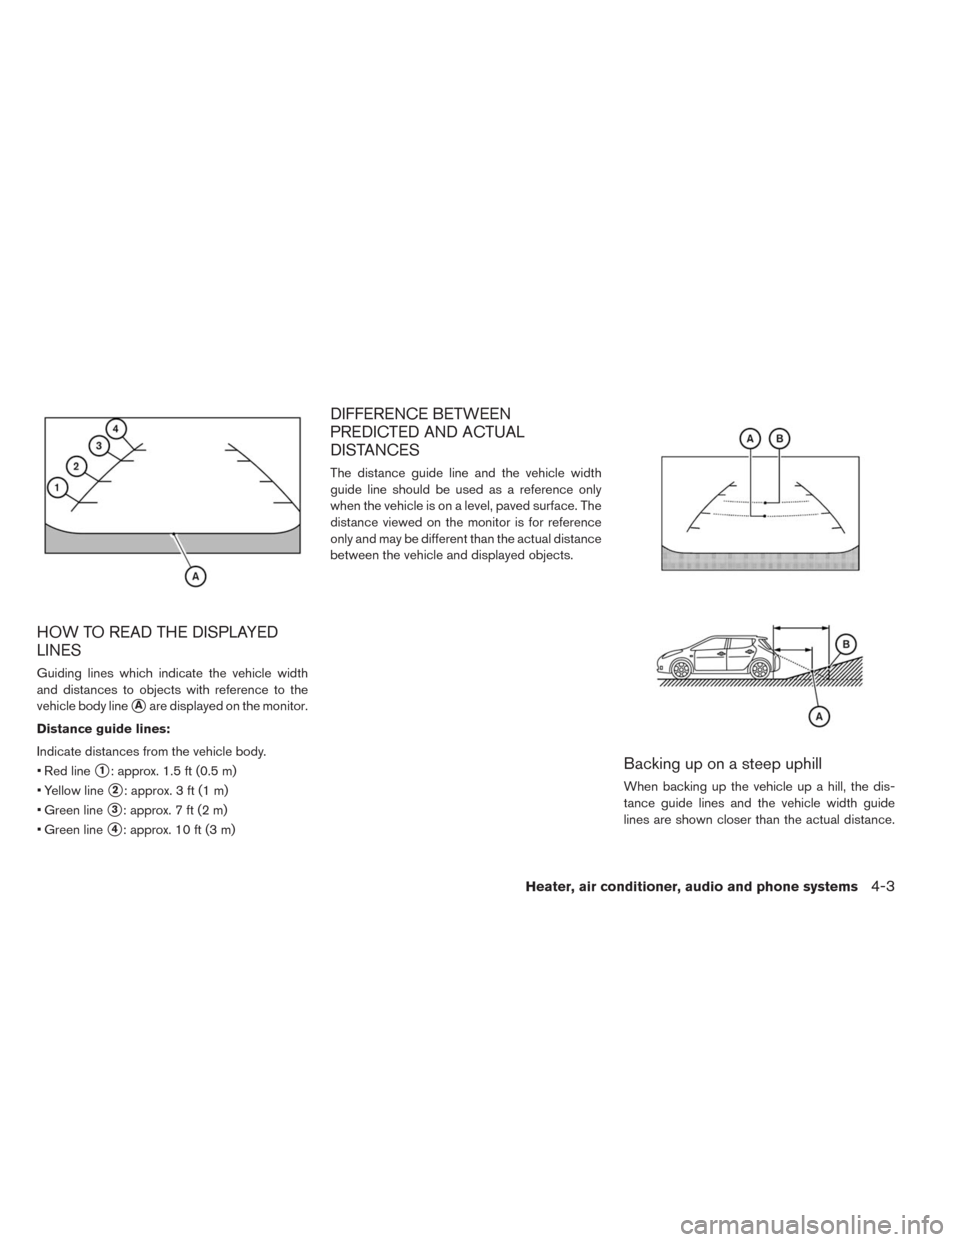 NISSAN LEAF 2014 1.G Owners Manual HOW TO READ THE DISPLAYED
LINES
Guiding lines which indicate the vehicle width
and distances to objects with reference to the
vehicle body line
Aare displayed on the monitor.
Distance guide lines:
In